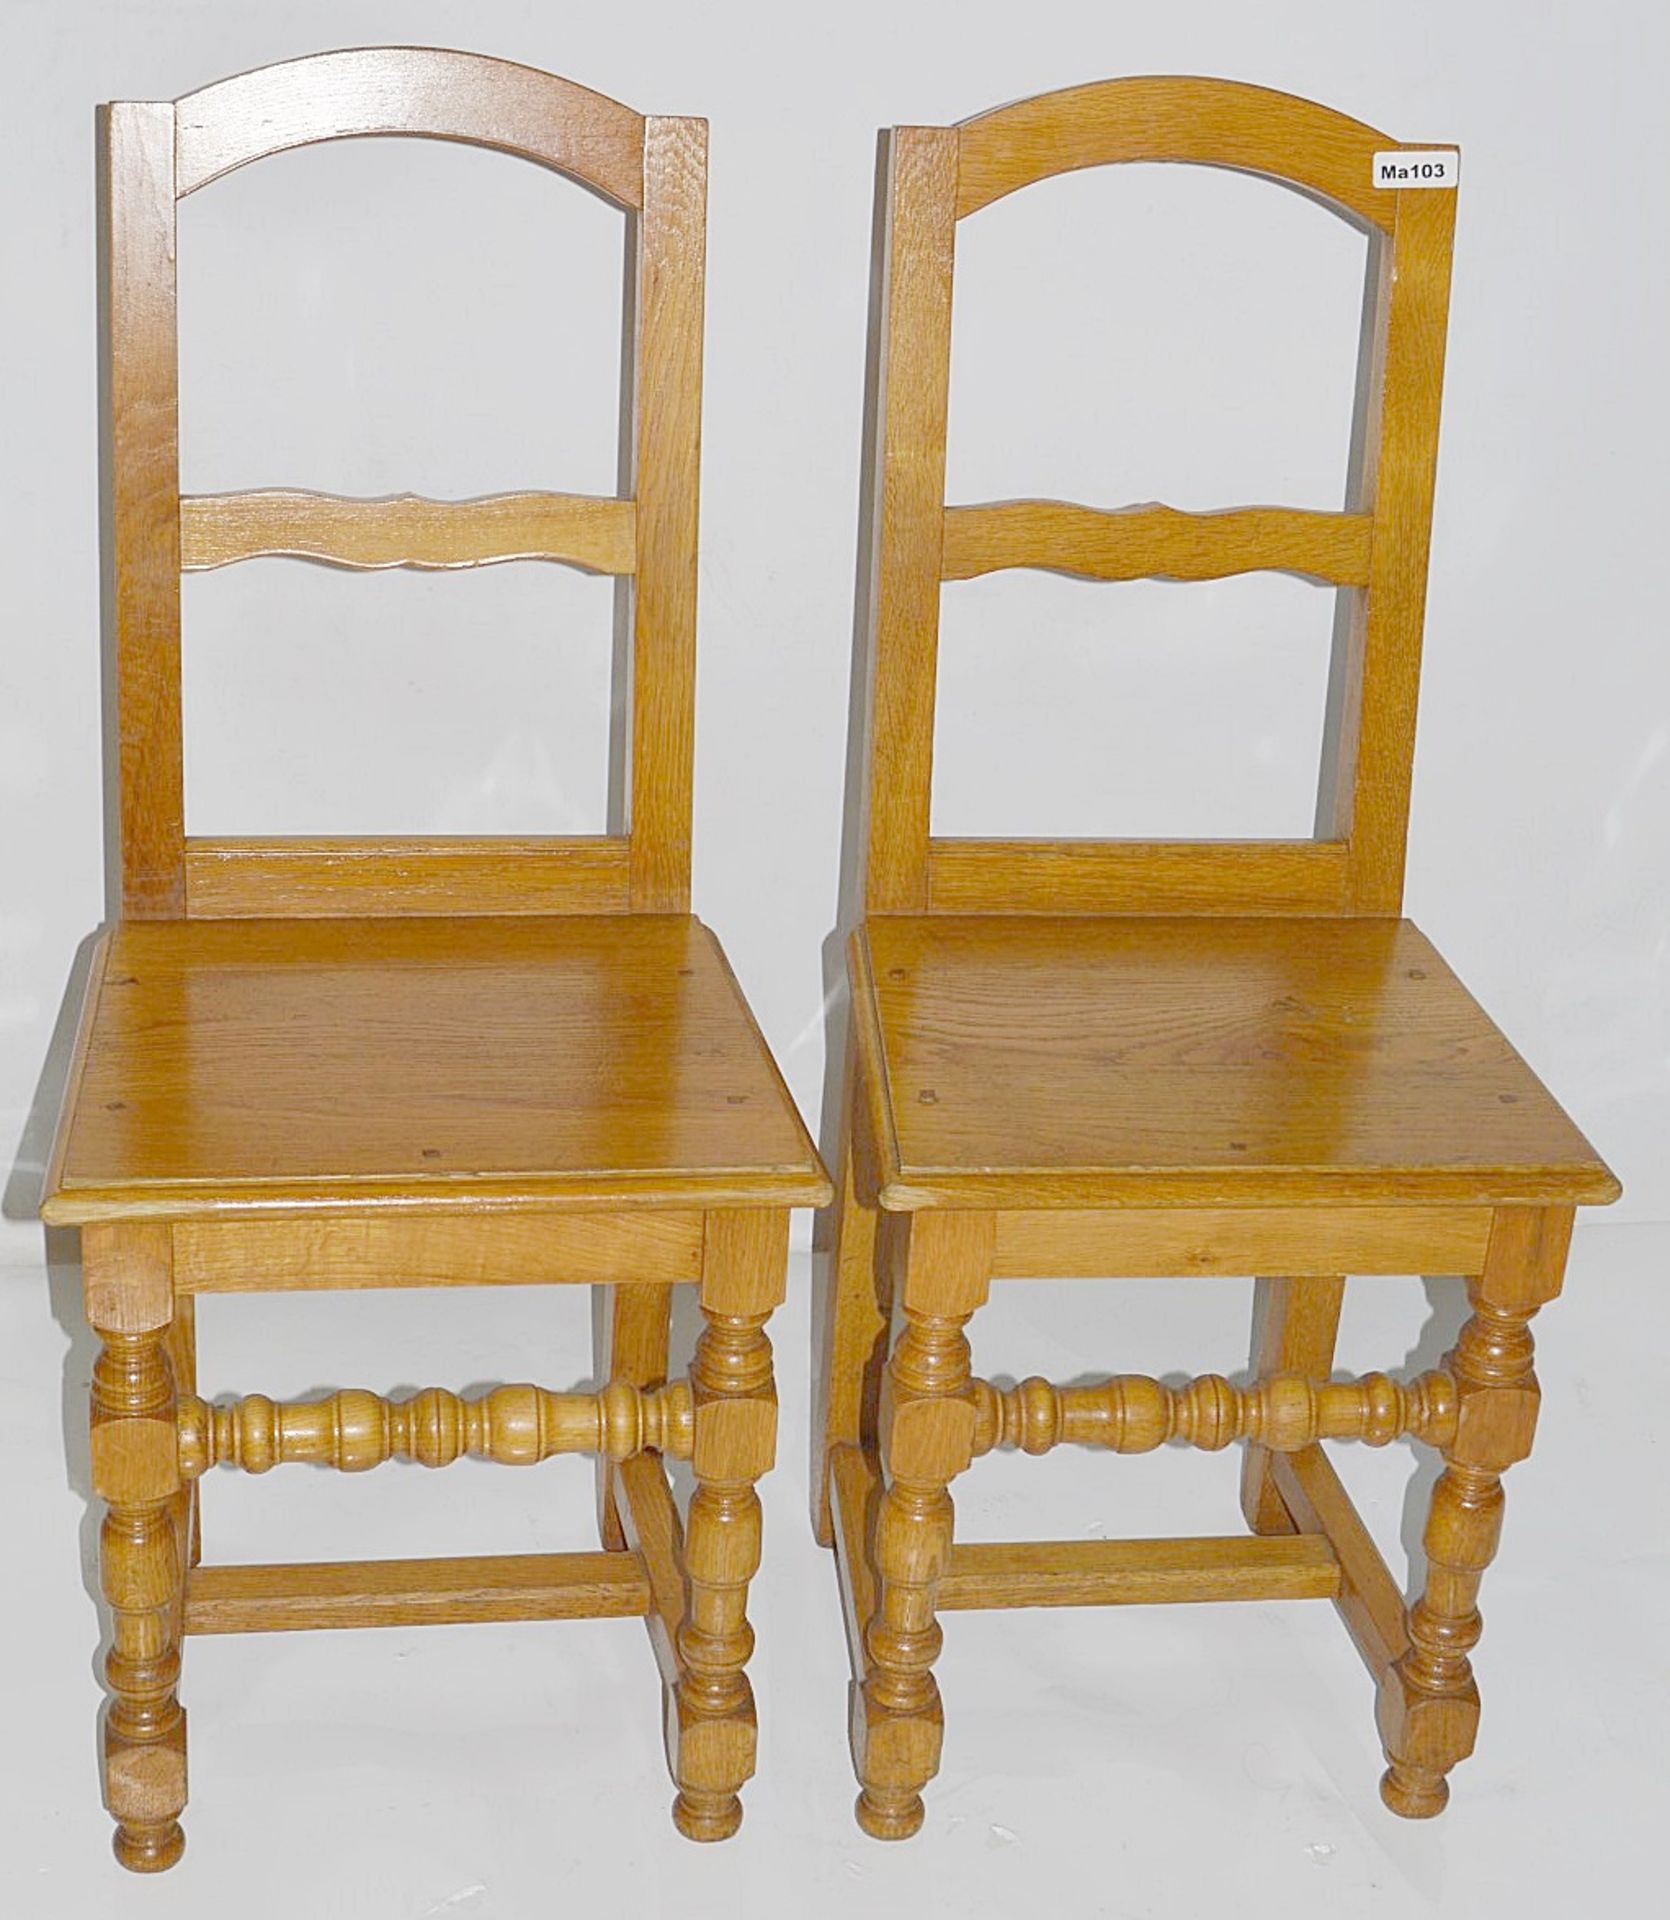 14 x Solid Wood Bistro Dining Chairs - Removed From A Leading Patisserie In London - Ref: MA103